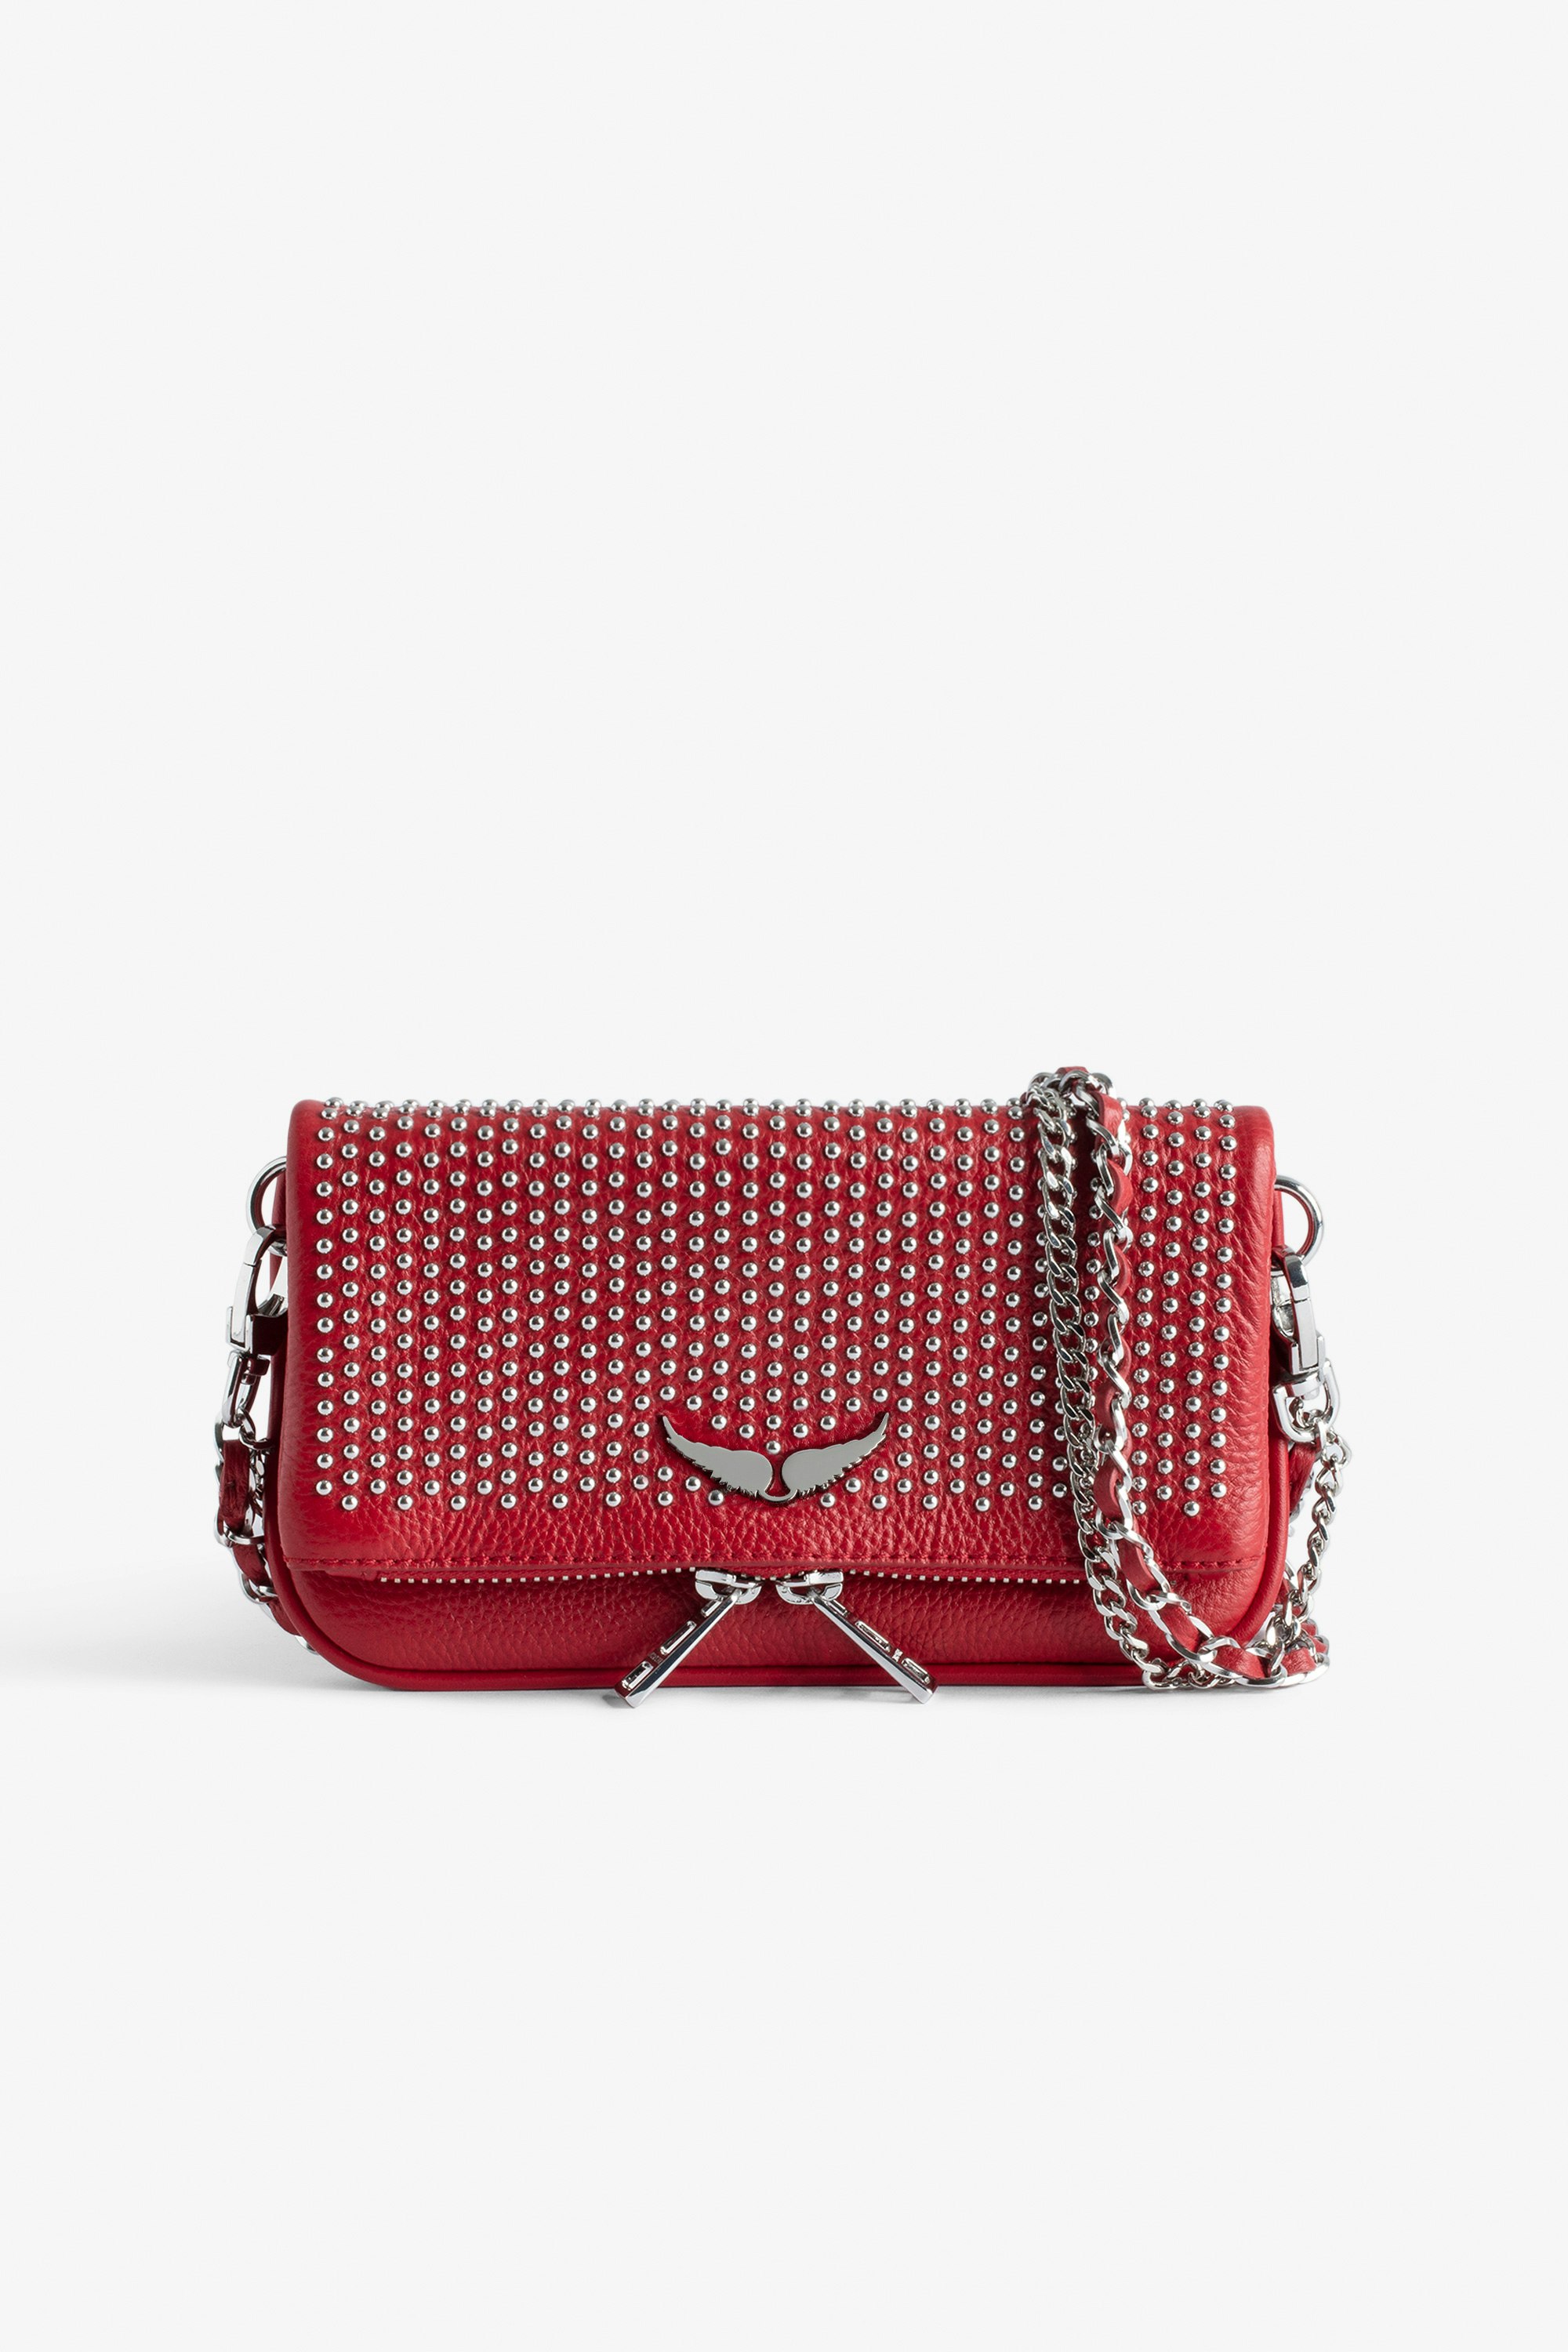 Rock Nano Dotted Swiss Clutch - Women’s small red grained leather clutch with dotted Swiss studs, chains and wings.